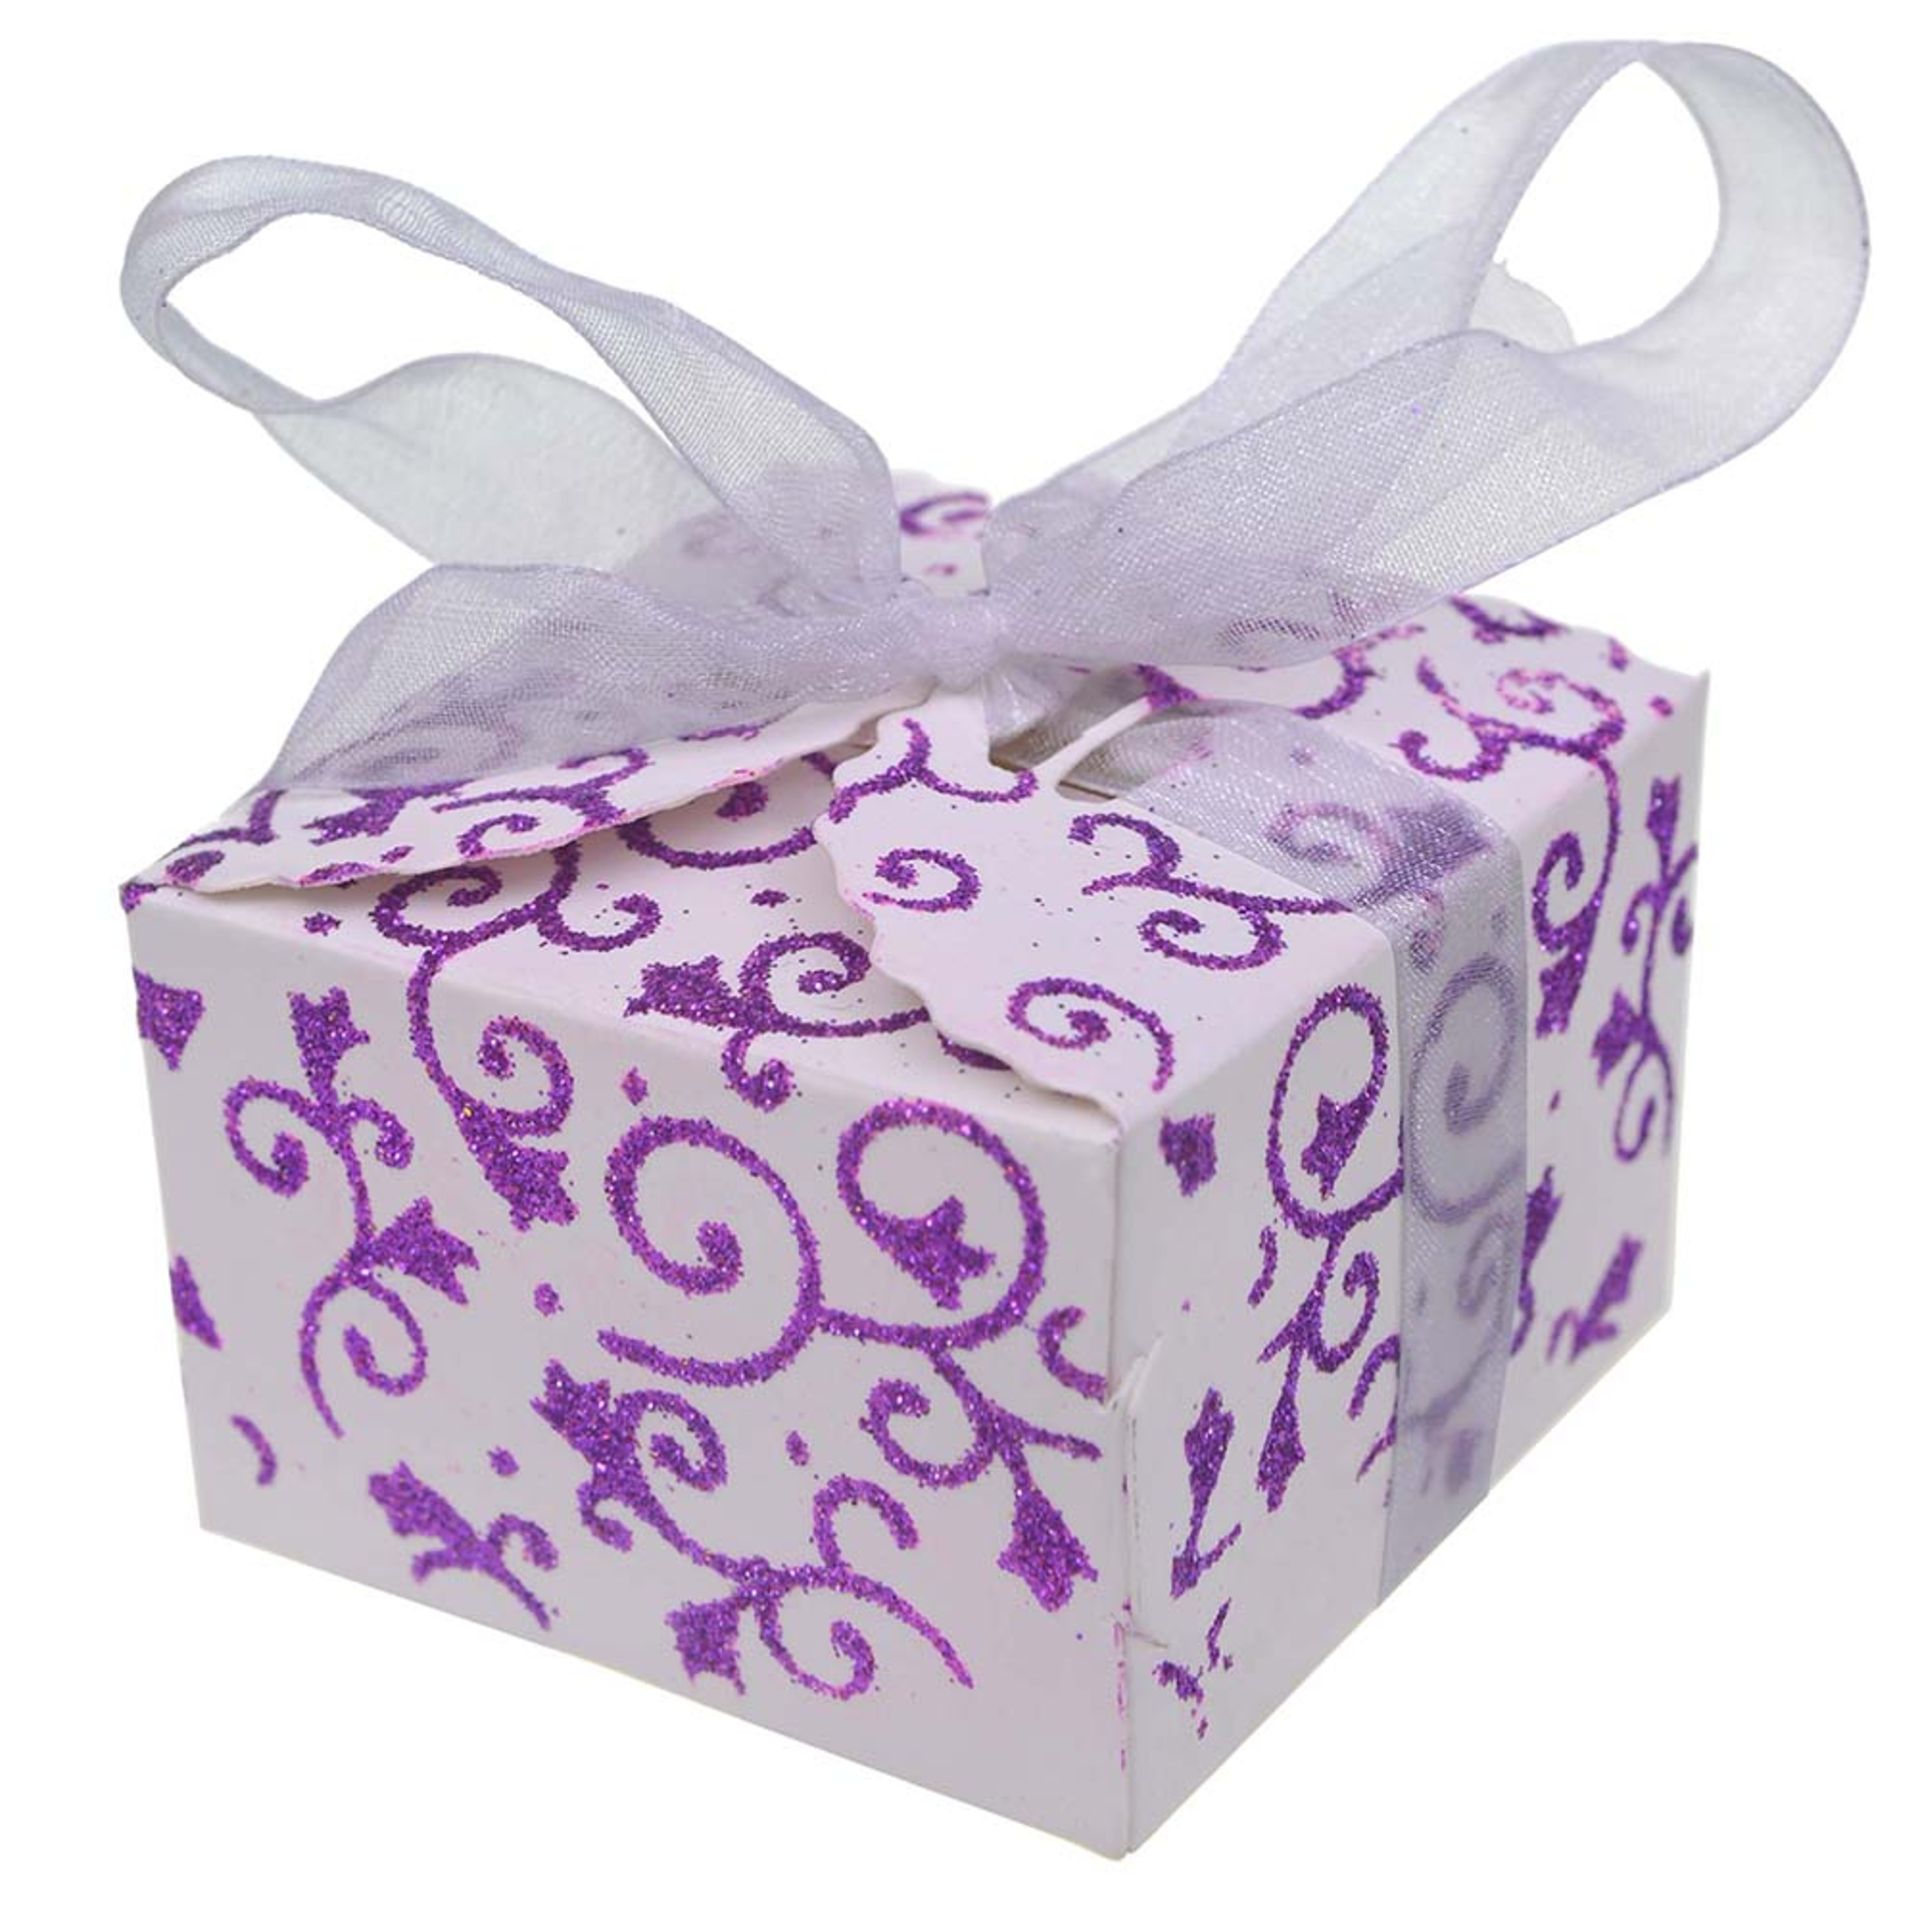 Lot of 200 White with Purple Glitter Favour Boxes. RRP £39.99